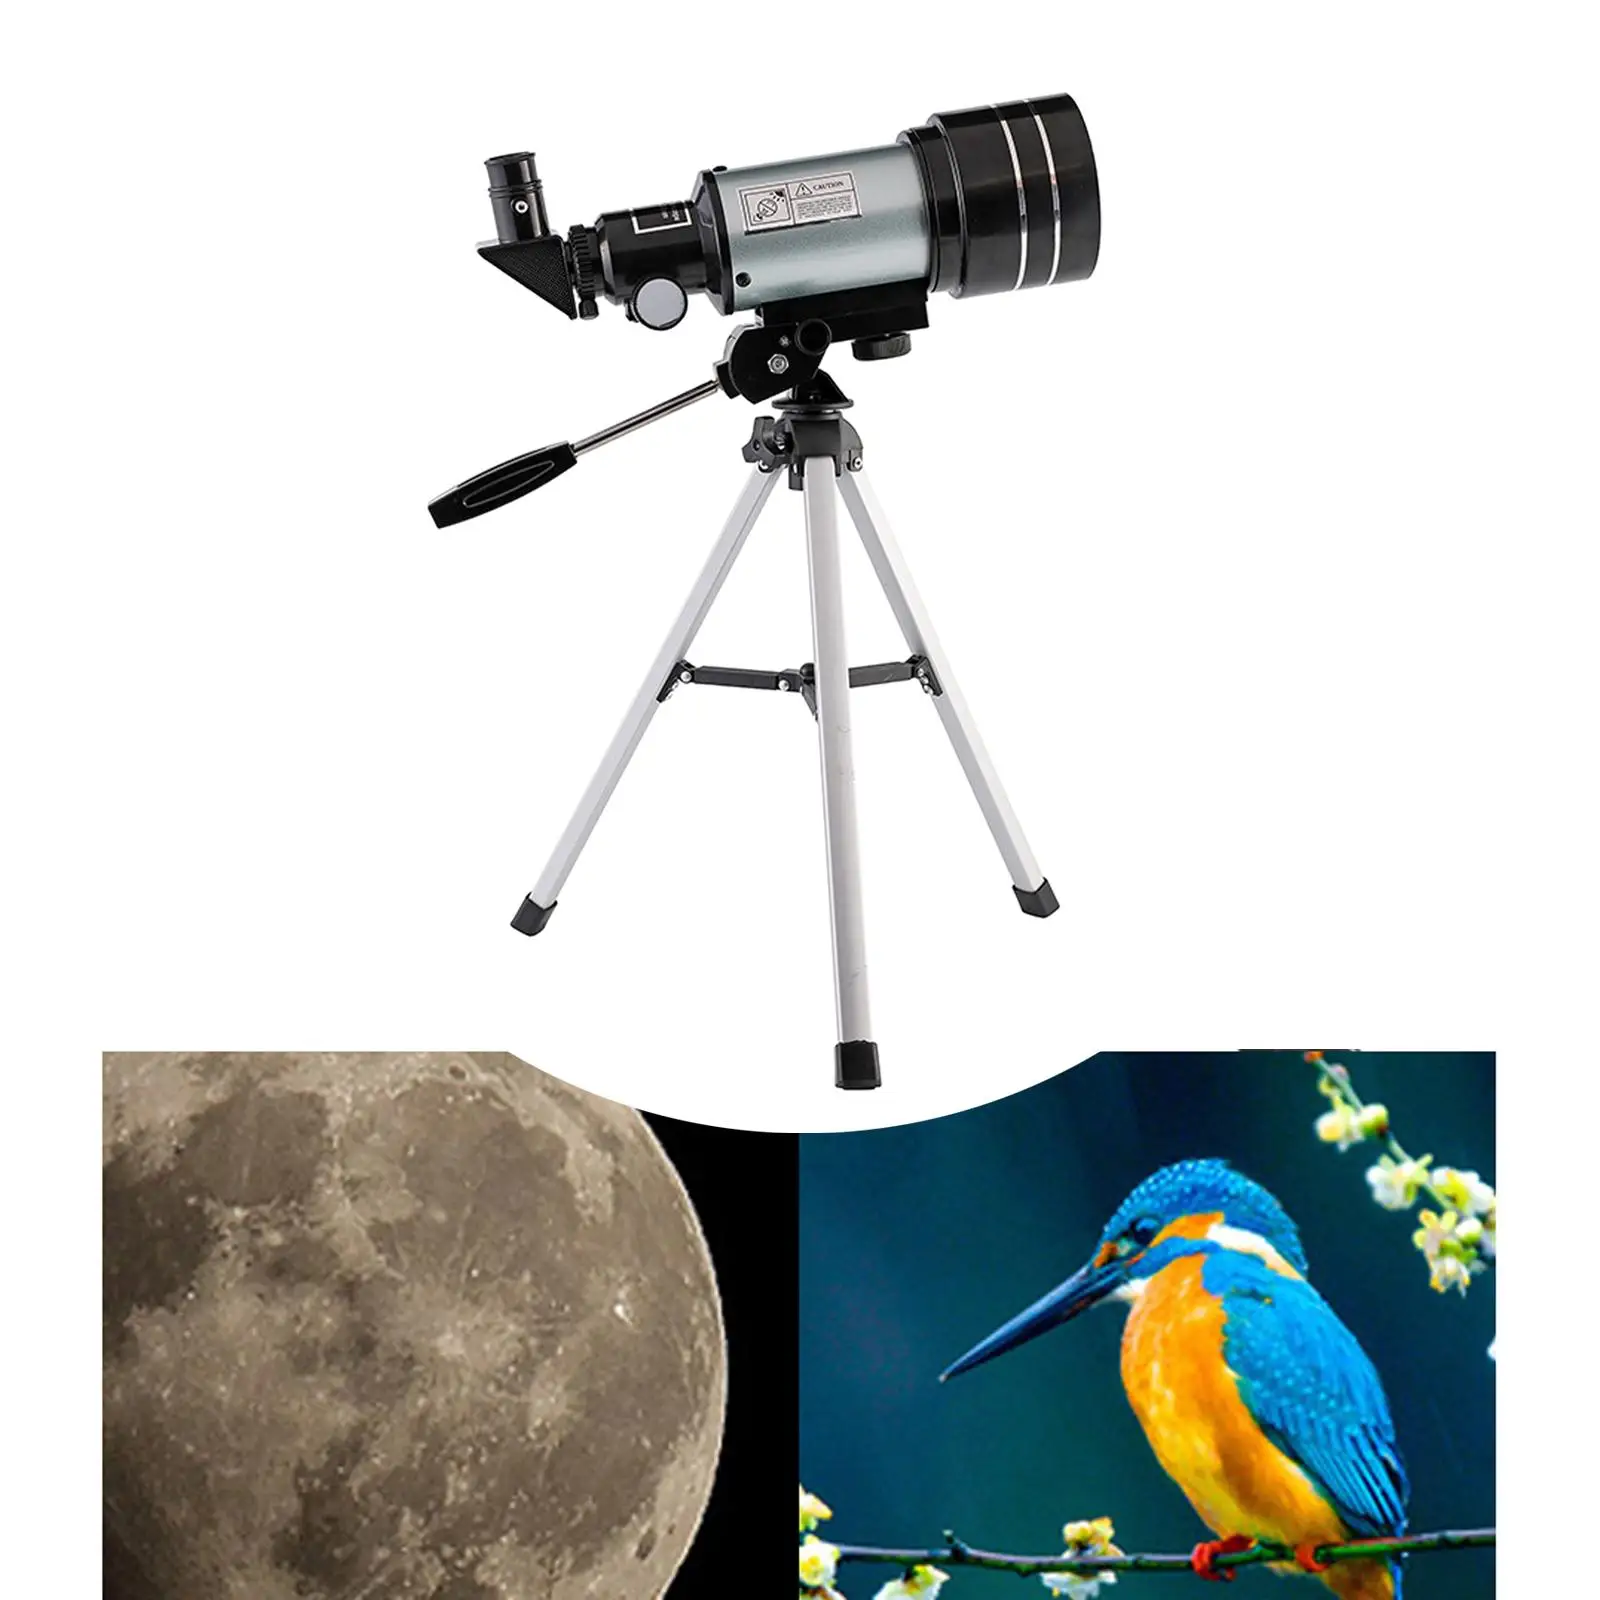 Astronomical Telescopes with Eyepieces Outdoor Spotting Scope Refractor Travel Telescope for Kids 8 10 12 Children